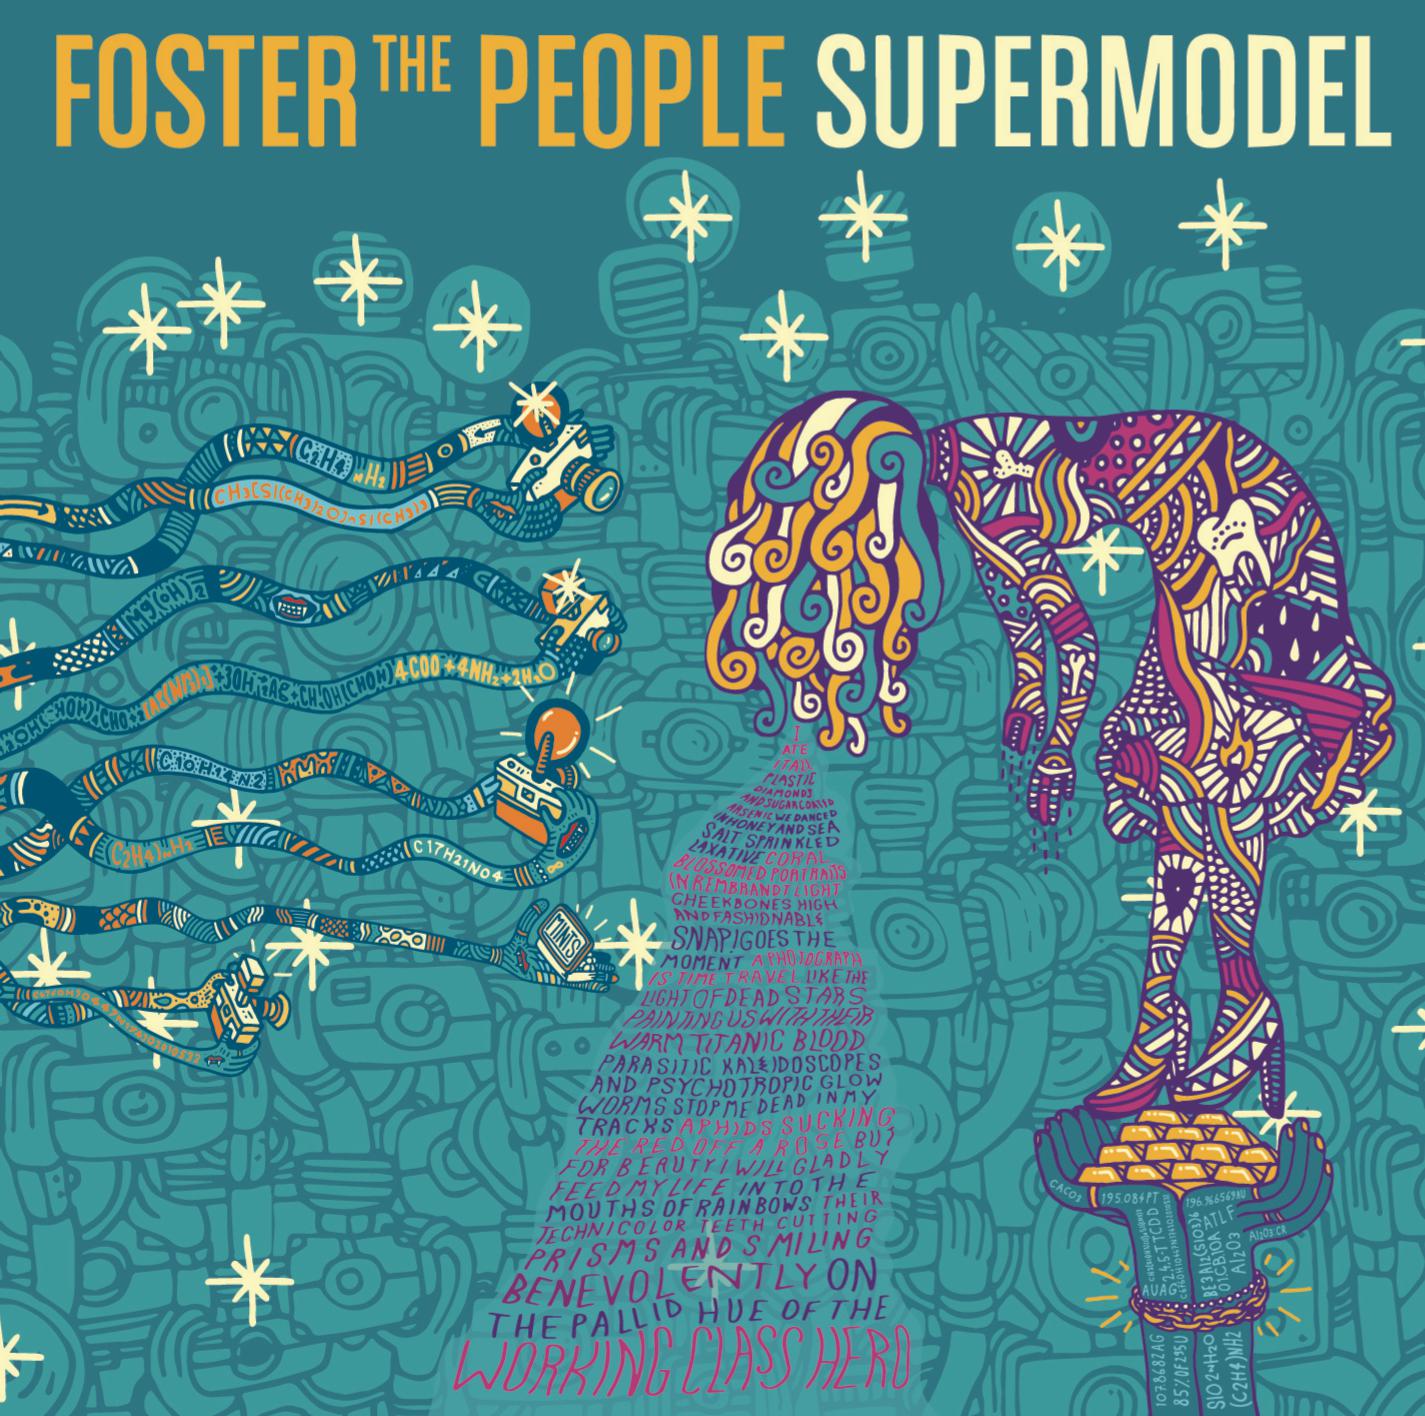 Foster The People - Supermodel (2014) [HDTracks FLAC 24bit/96kHz]